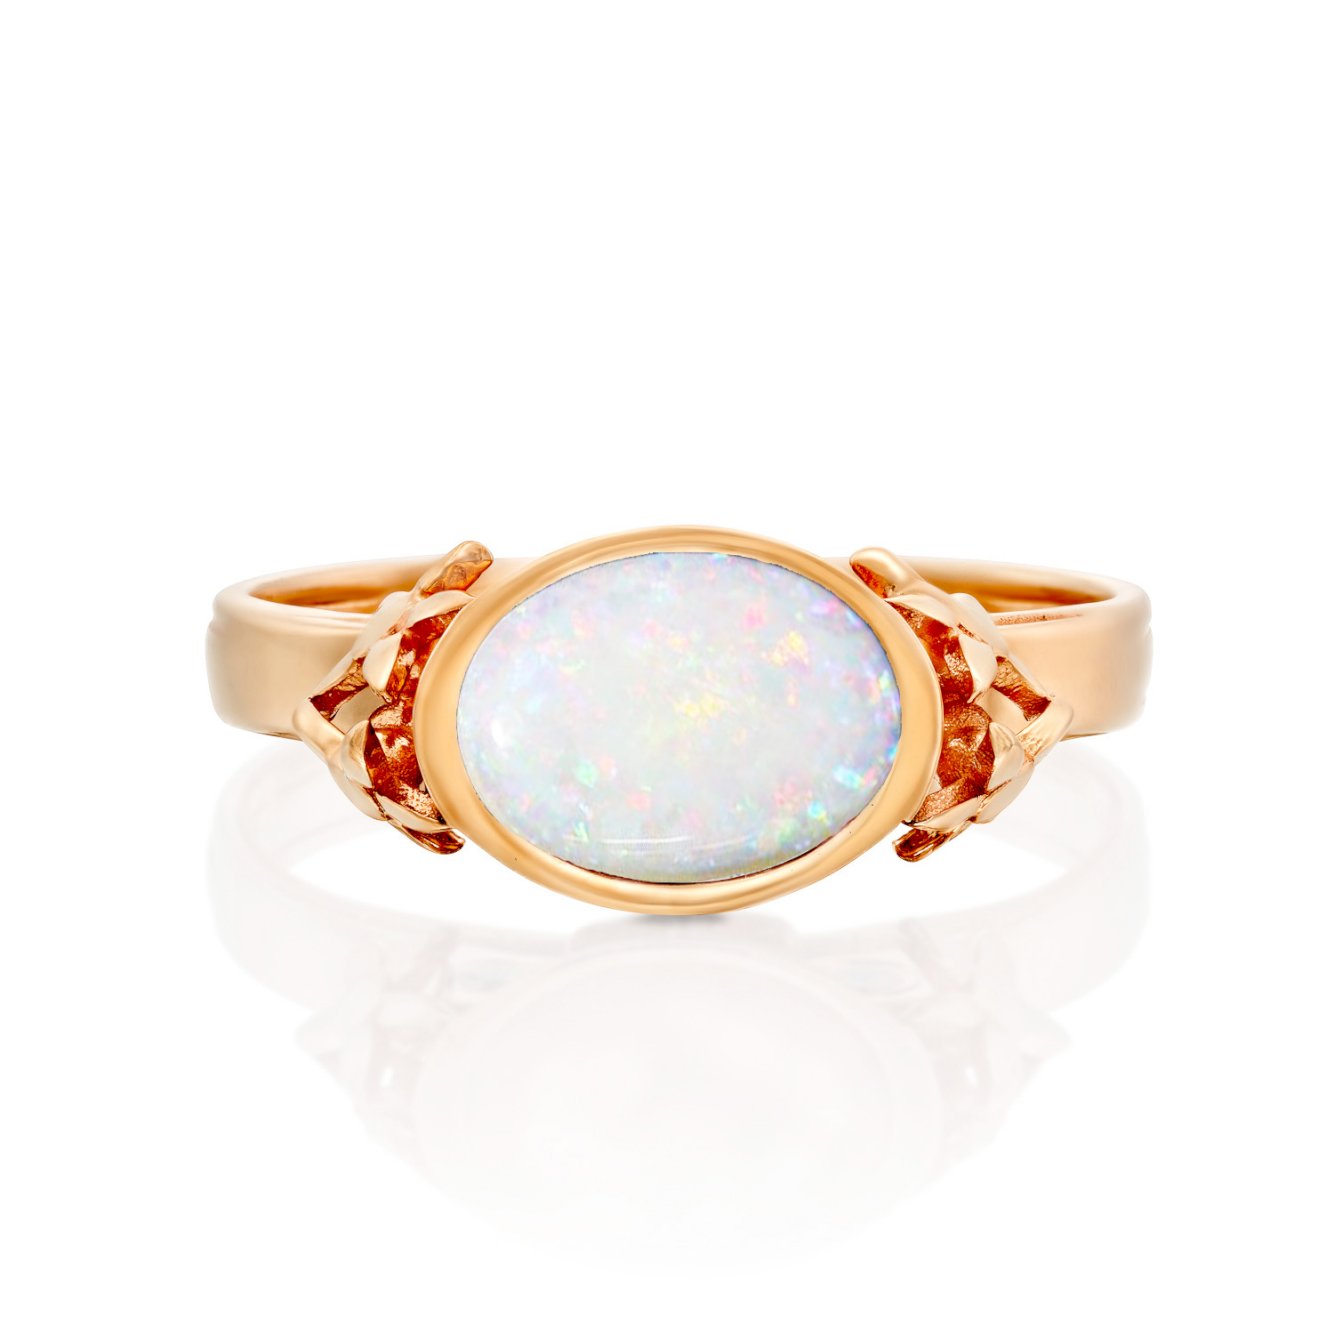 Australian Opal engagement ring set with diamonds- Floral Ring